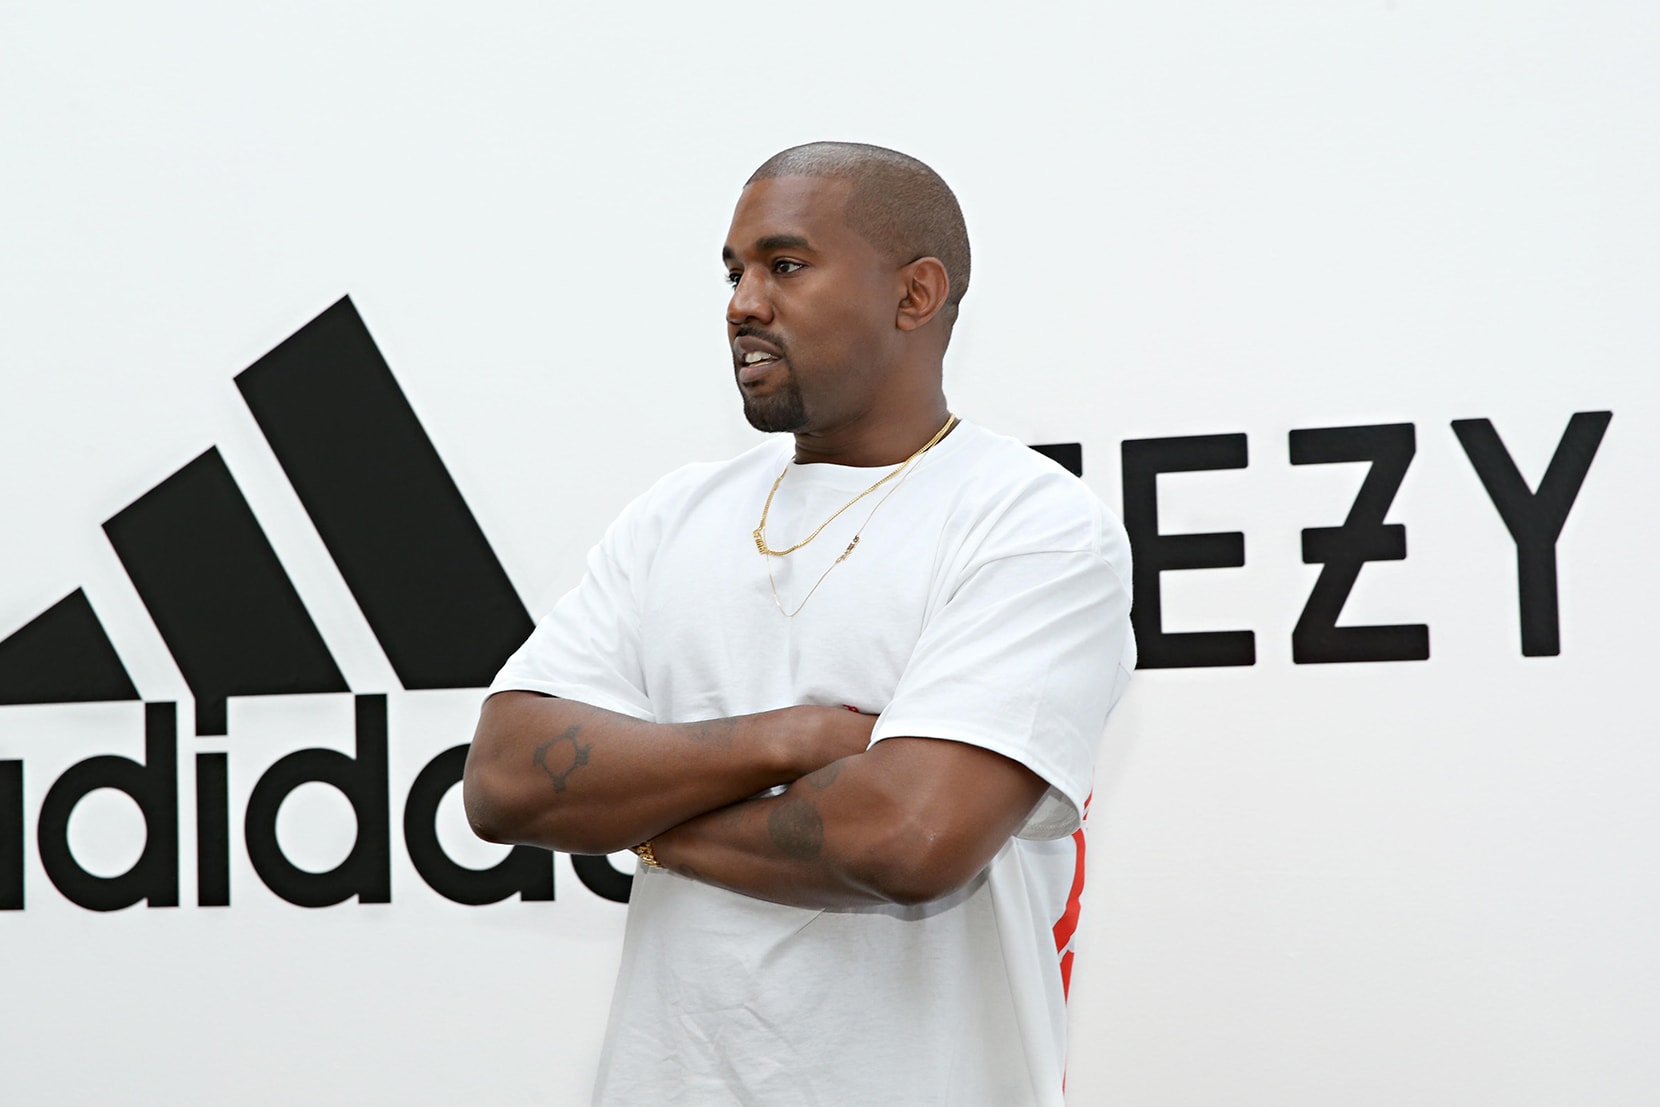 adidas Kanye West YEEZY Slavery Remarks TMZ Candace Owens T.I. Controversy Kasper Rorsted Bloomberg Interview Q1 Results